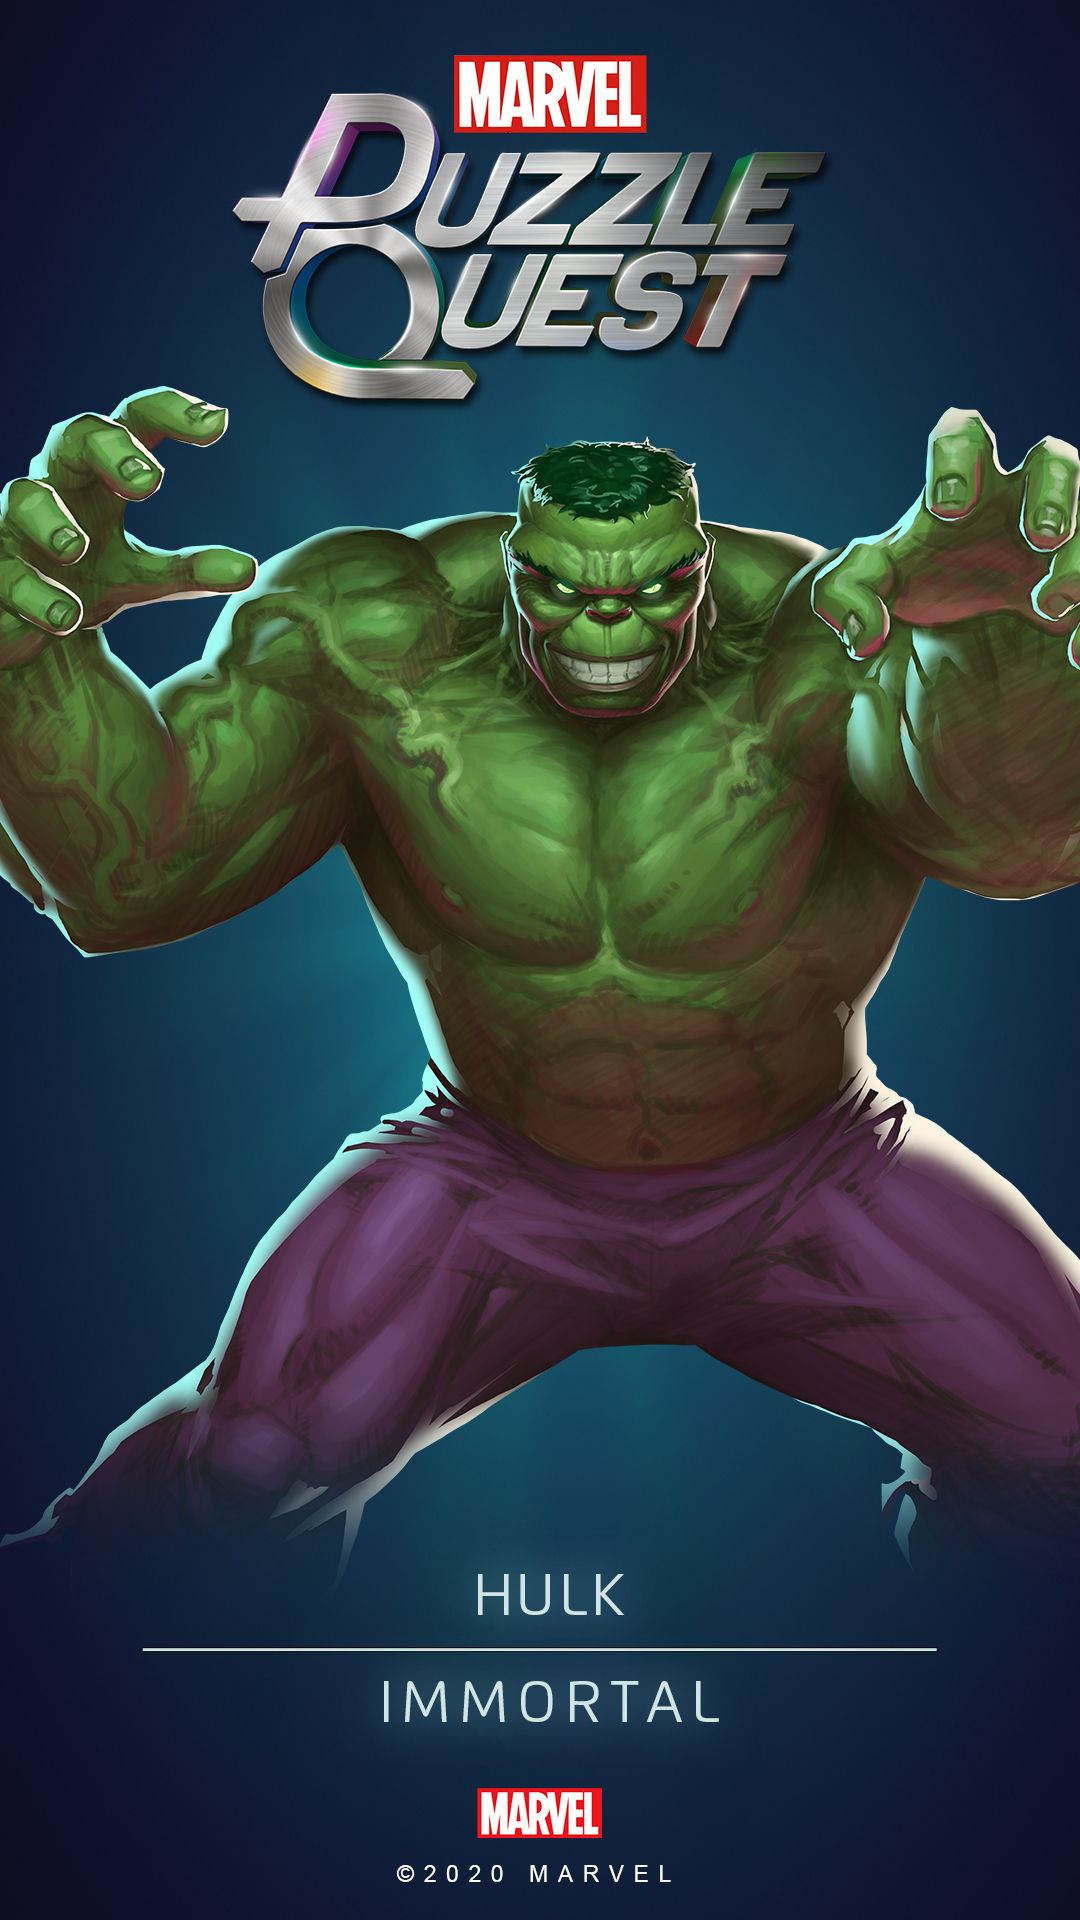 Marvel Puzzle Quest Hulk (Immortal) Wallpaper are here! Smash protection not guaranteed! #MarvelPuzzleQuest